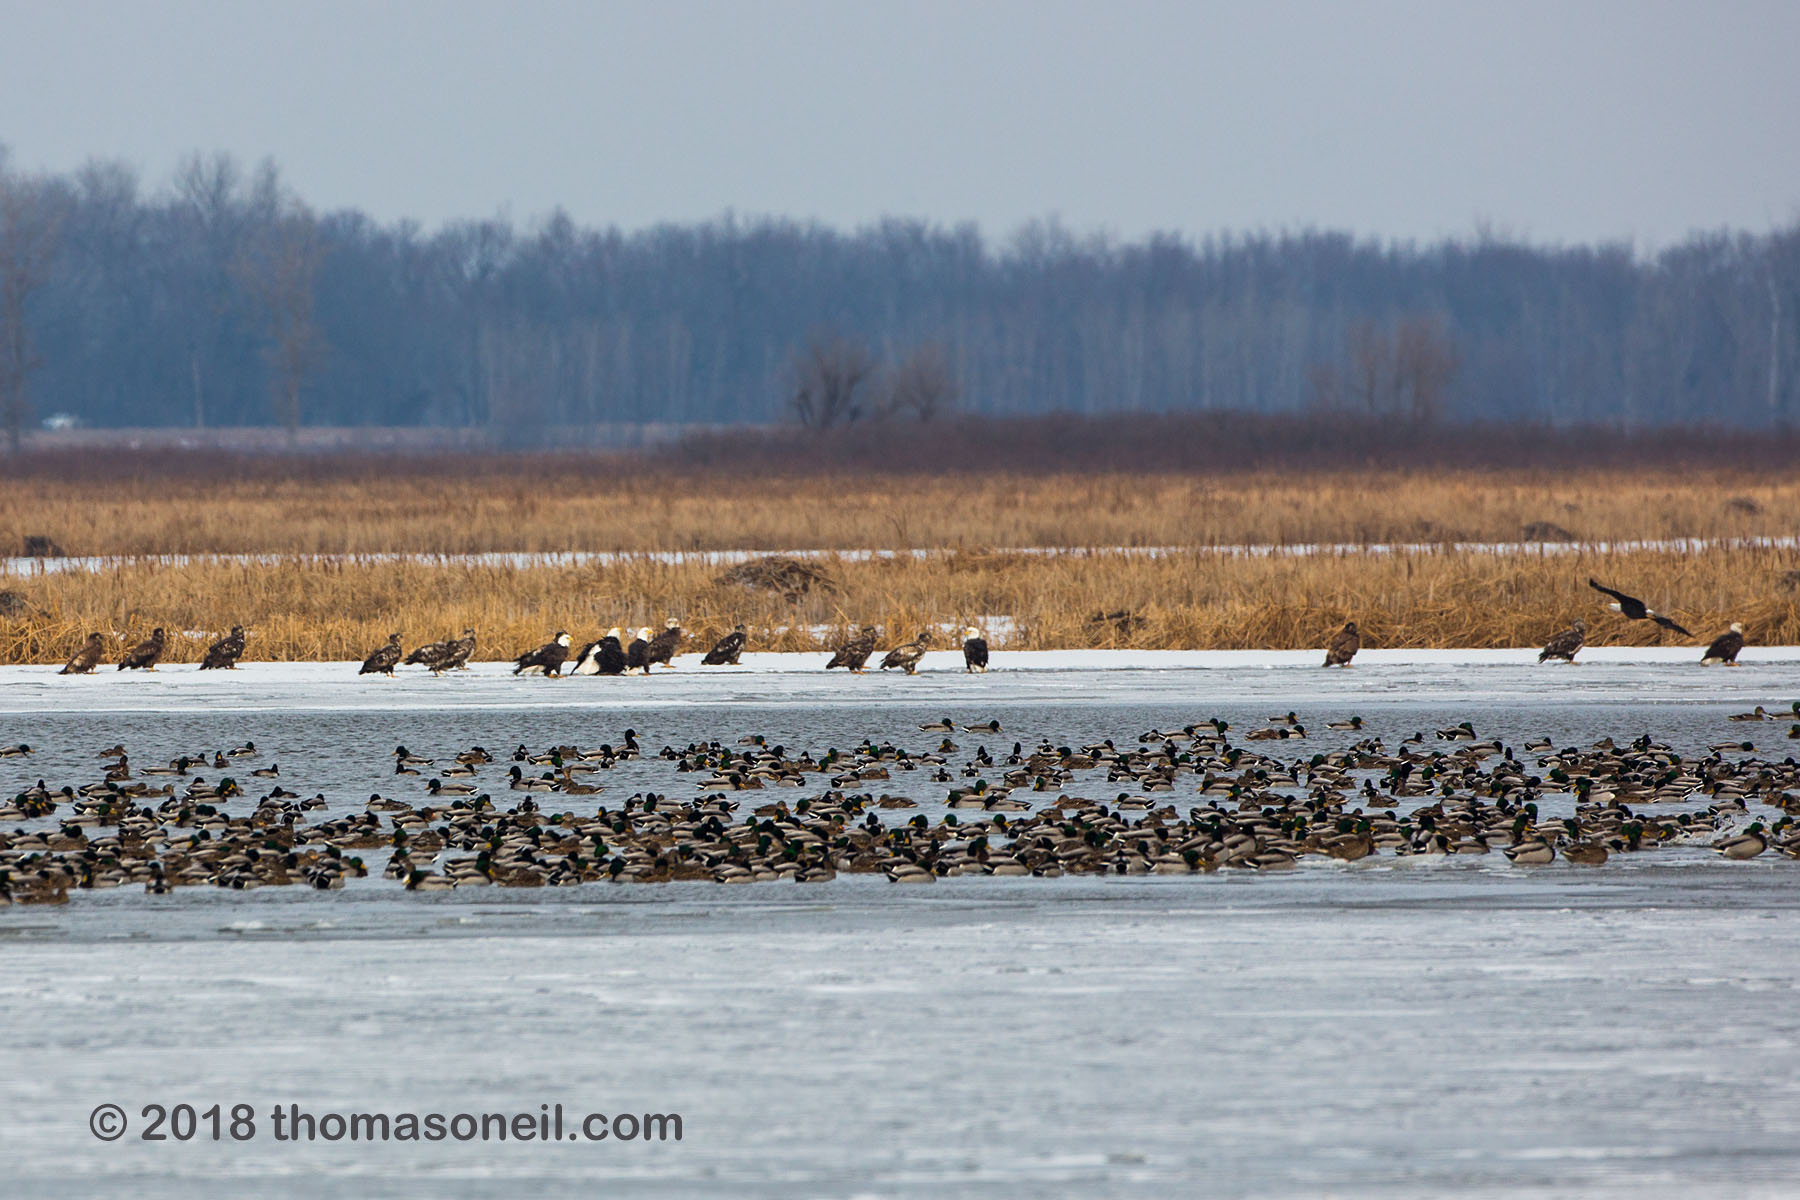 About 20 bald eagles on the ice keeping an eye on the ducks, Loess Bluffs National Wildlife Refuge, Missouri, December 2018.  Click for next photo.